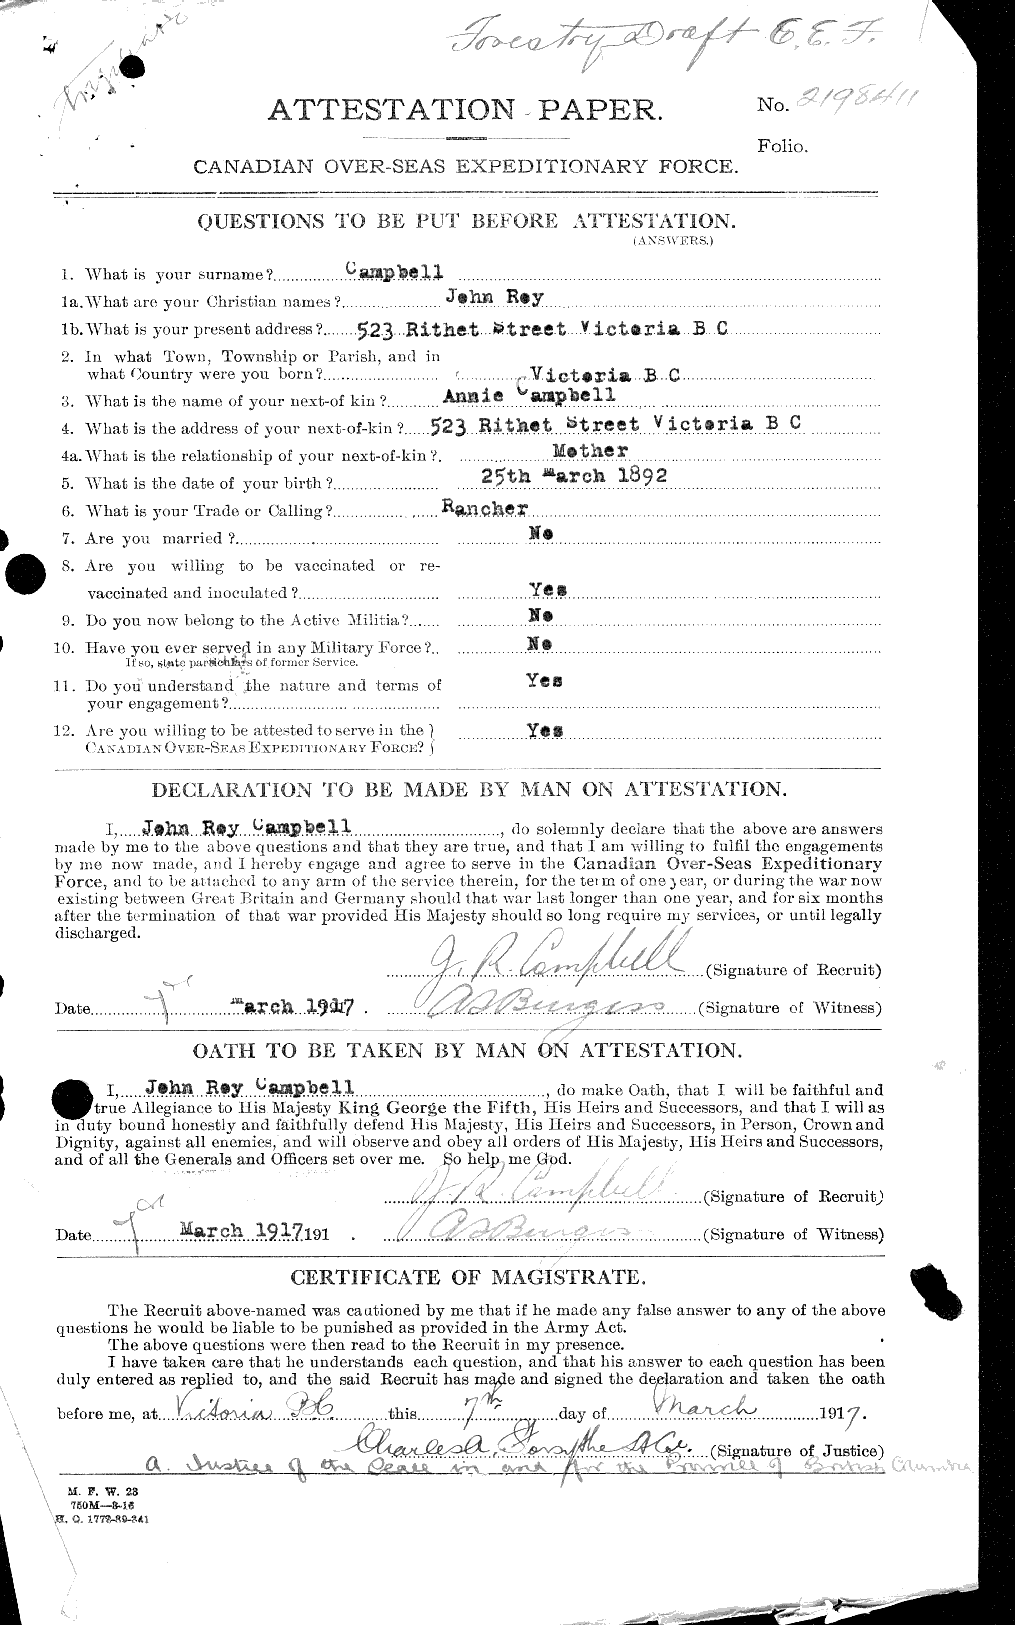 Personnel Records of the First World War - CEF 003786a